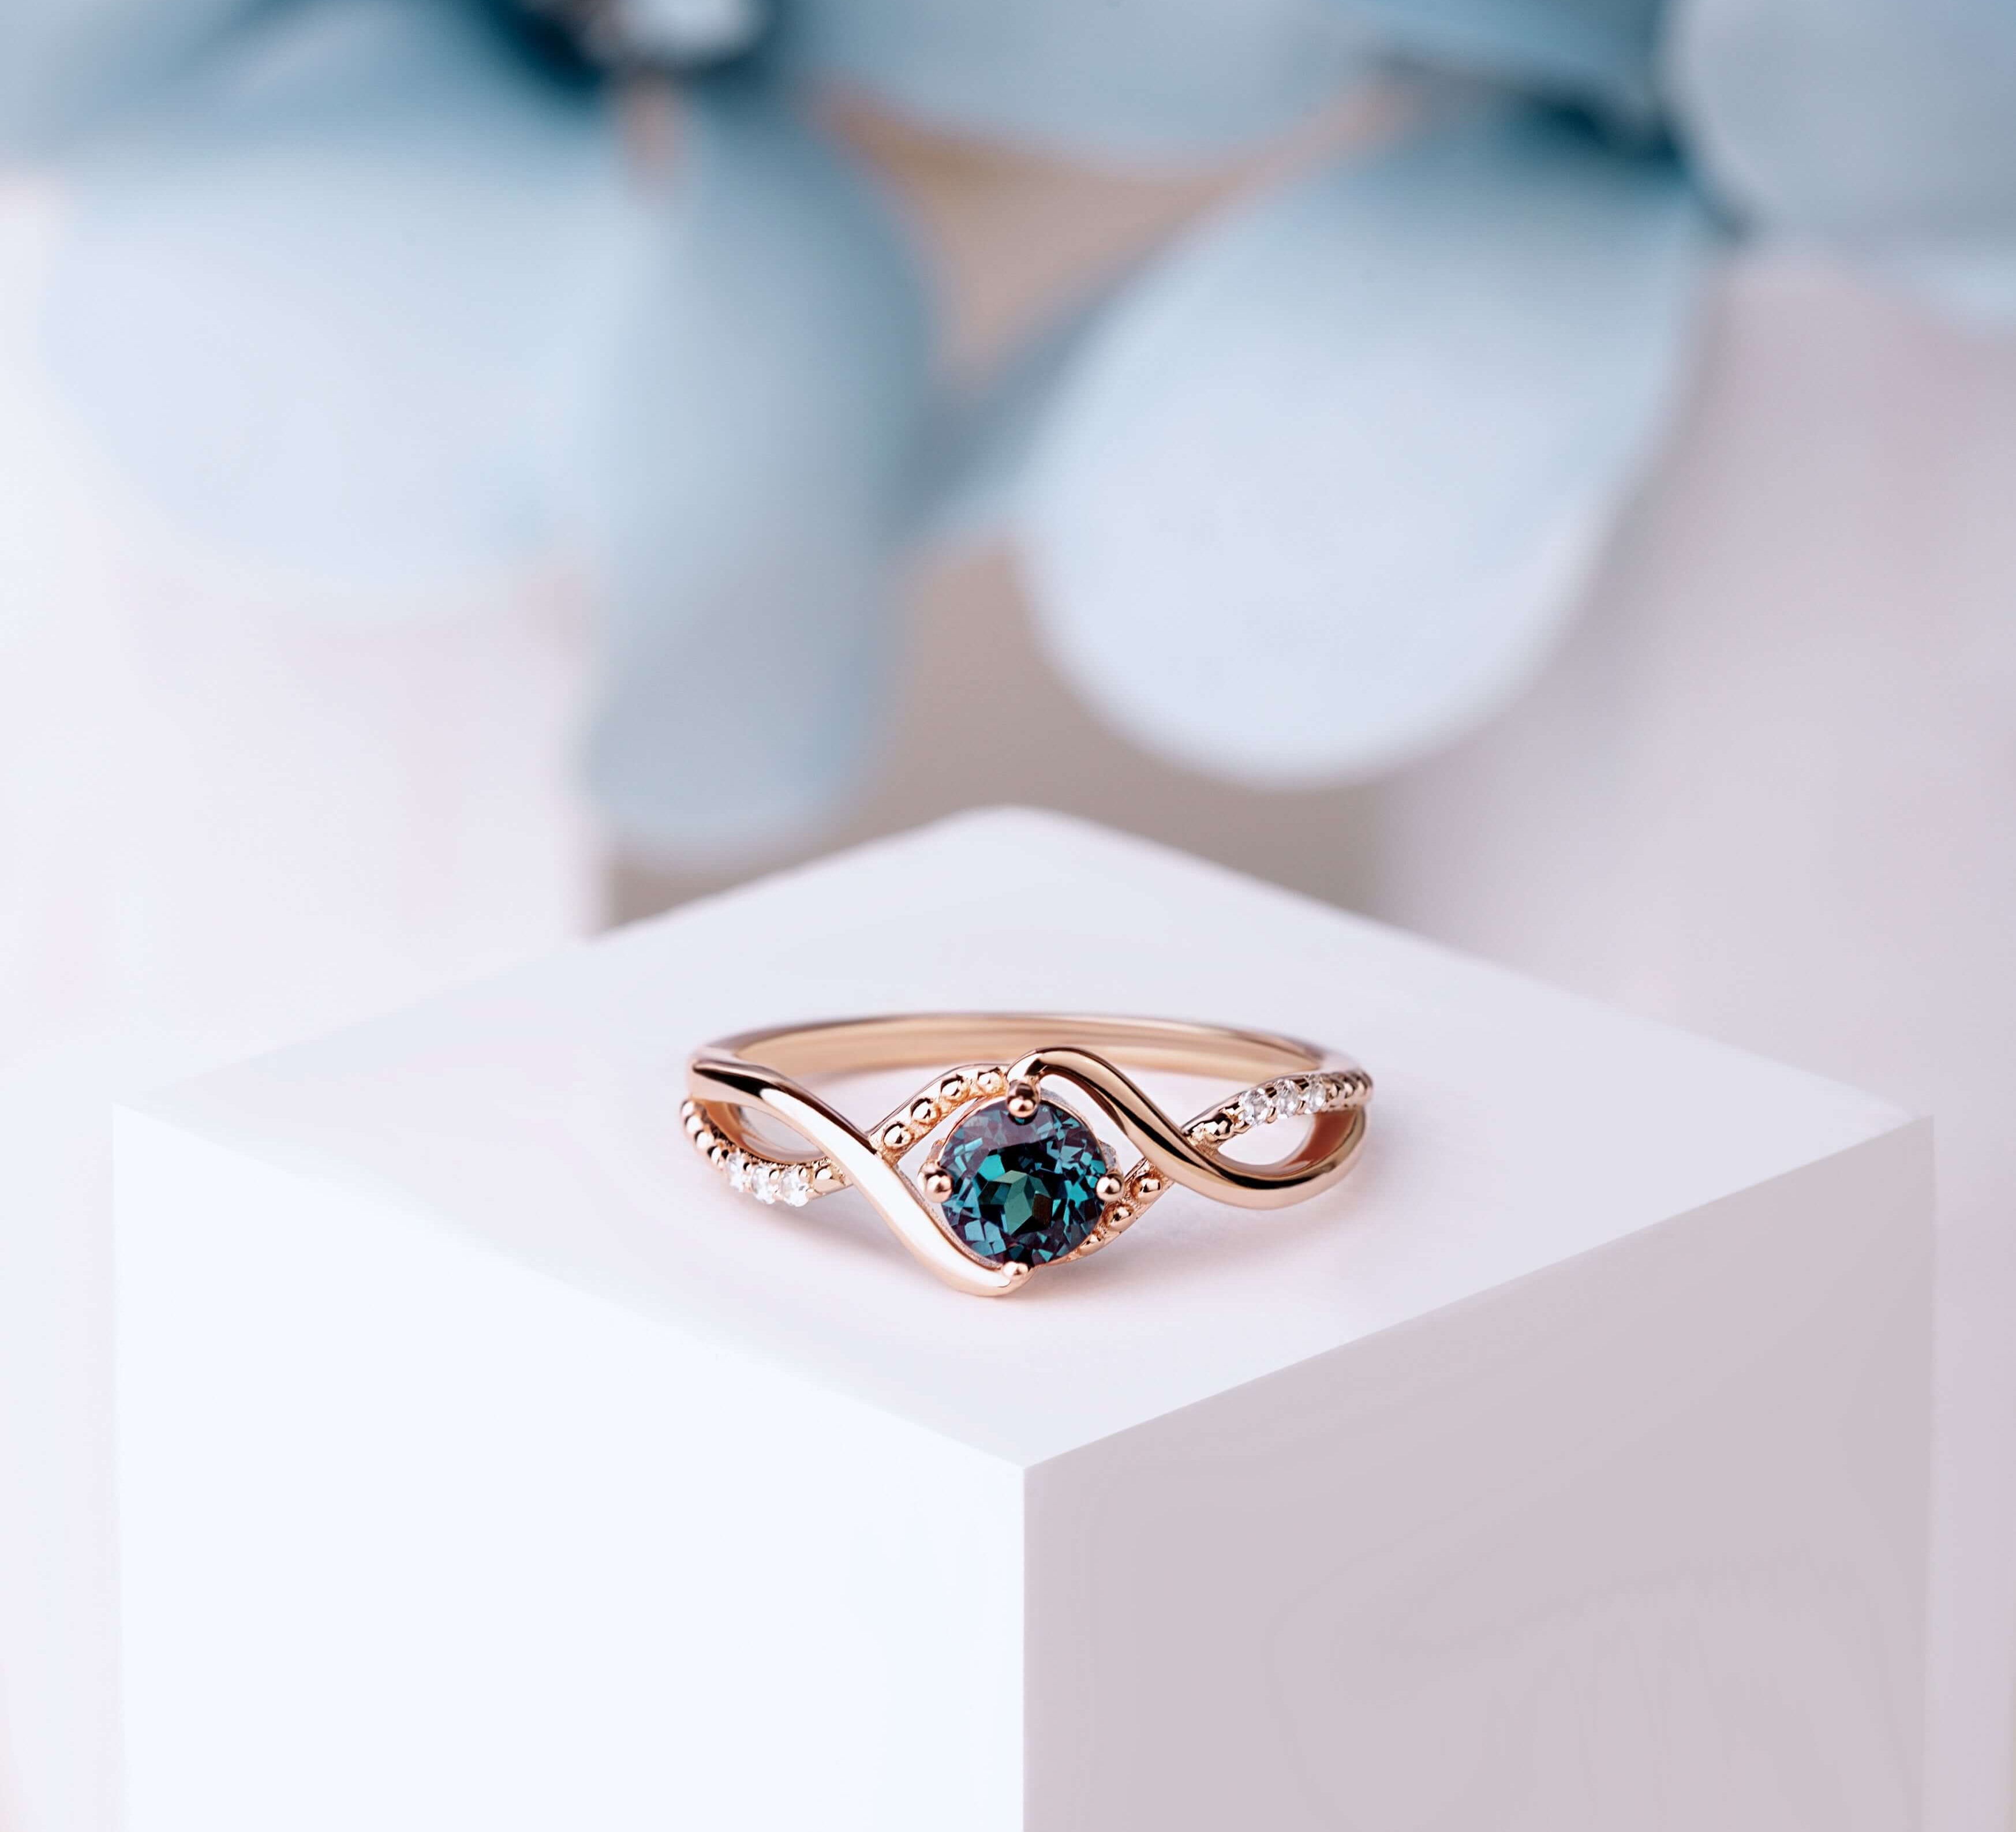 Alexandrite statement ring with intricate detailing and sparkling accents